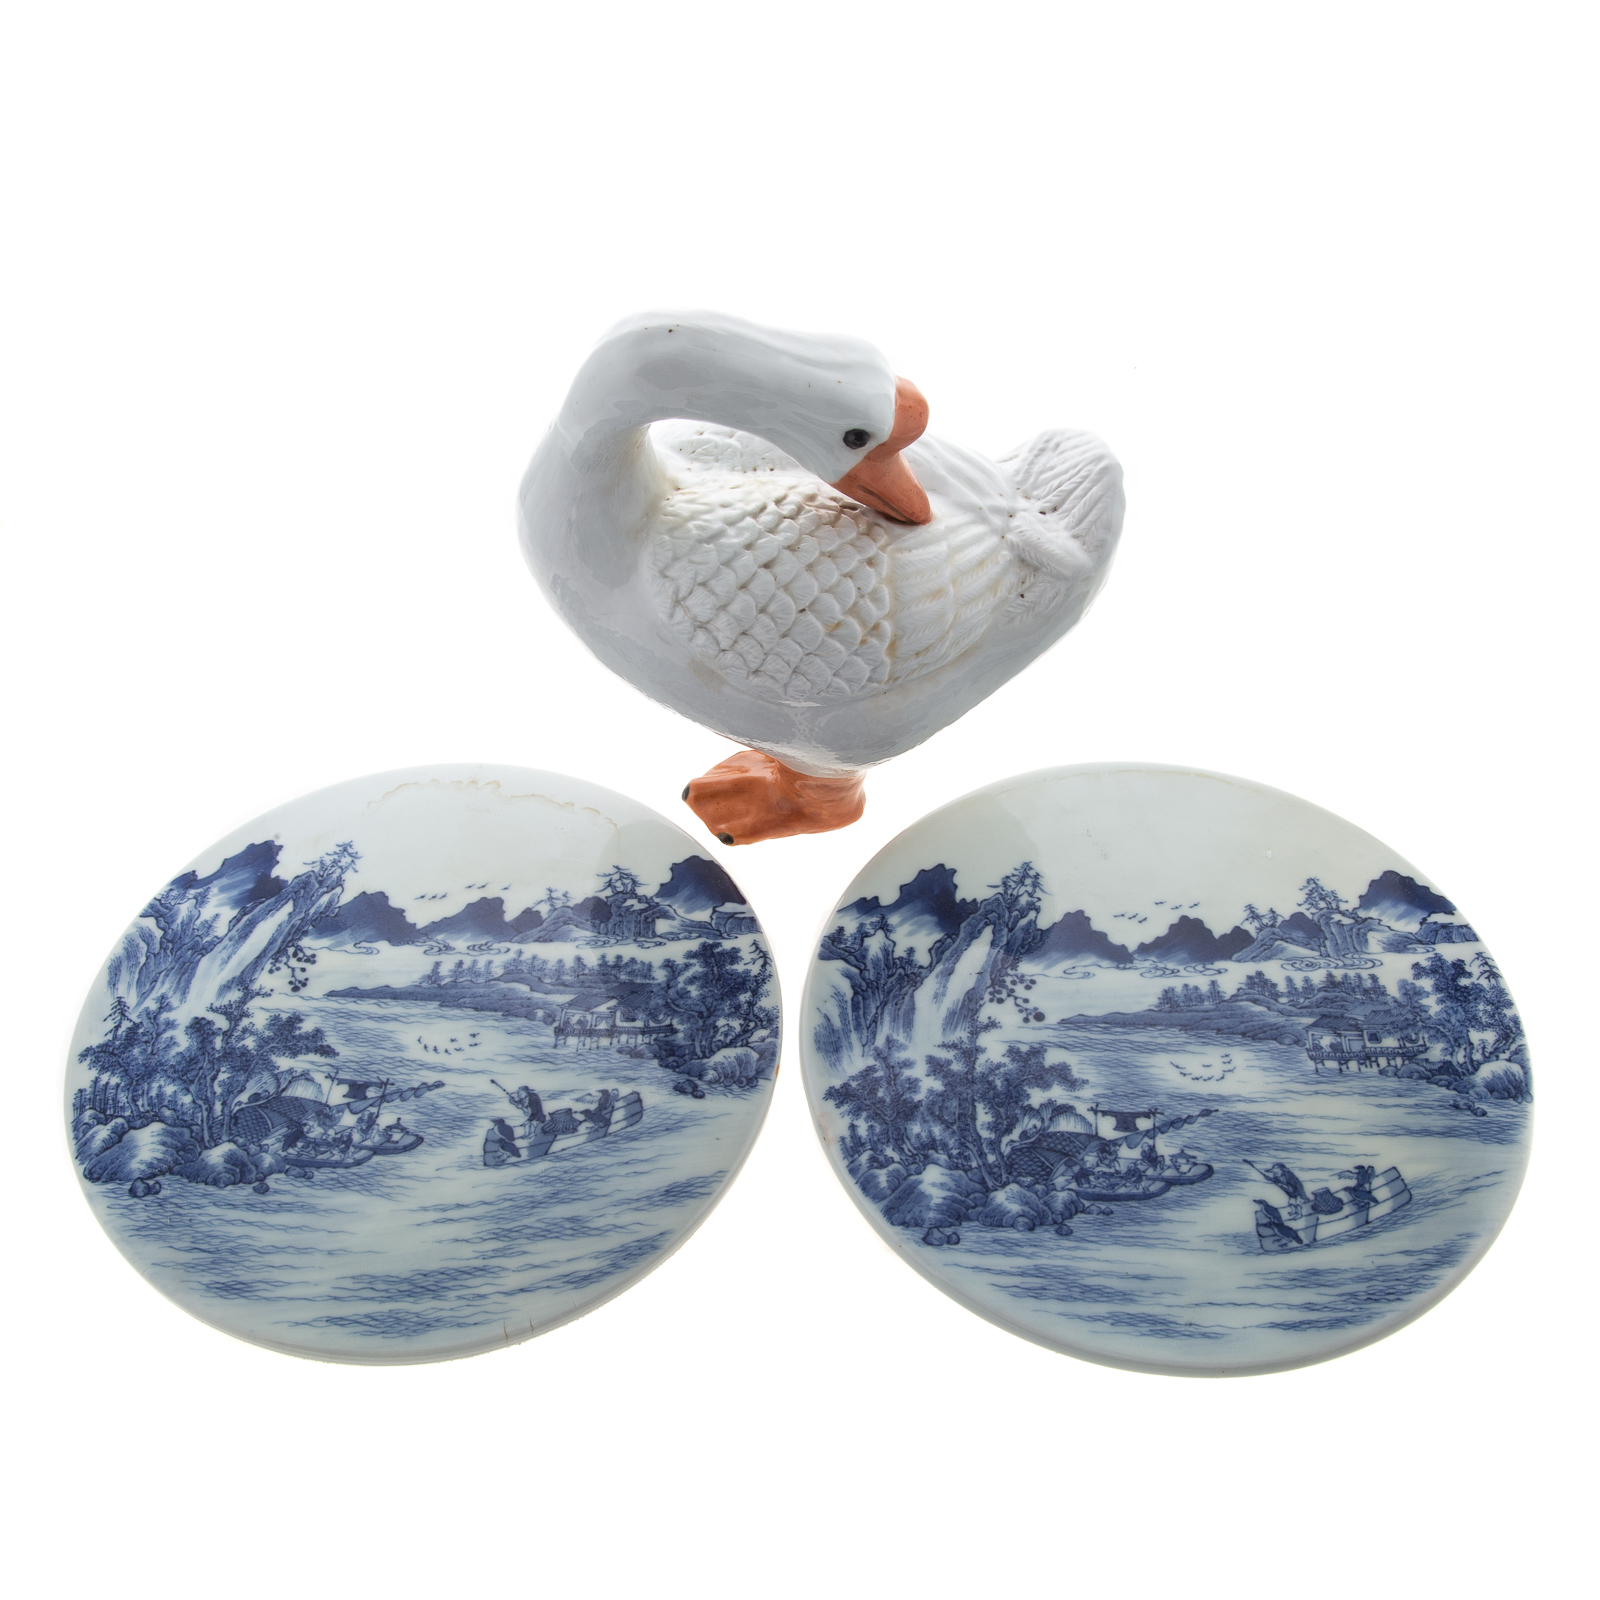 A PAIR OF CHINESE EXPORT TRIVETS 29dd41